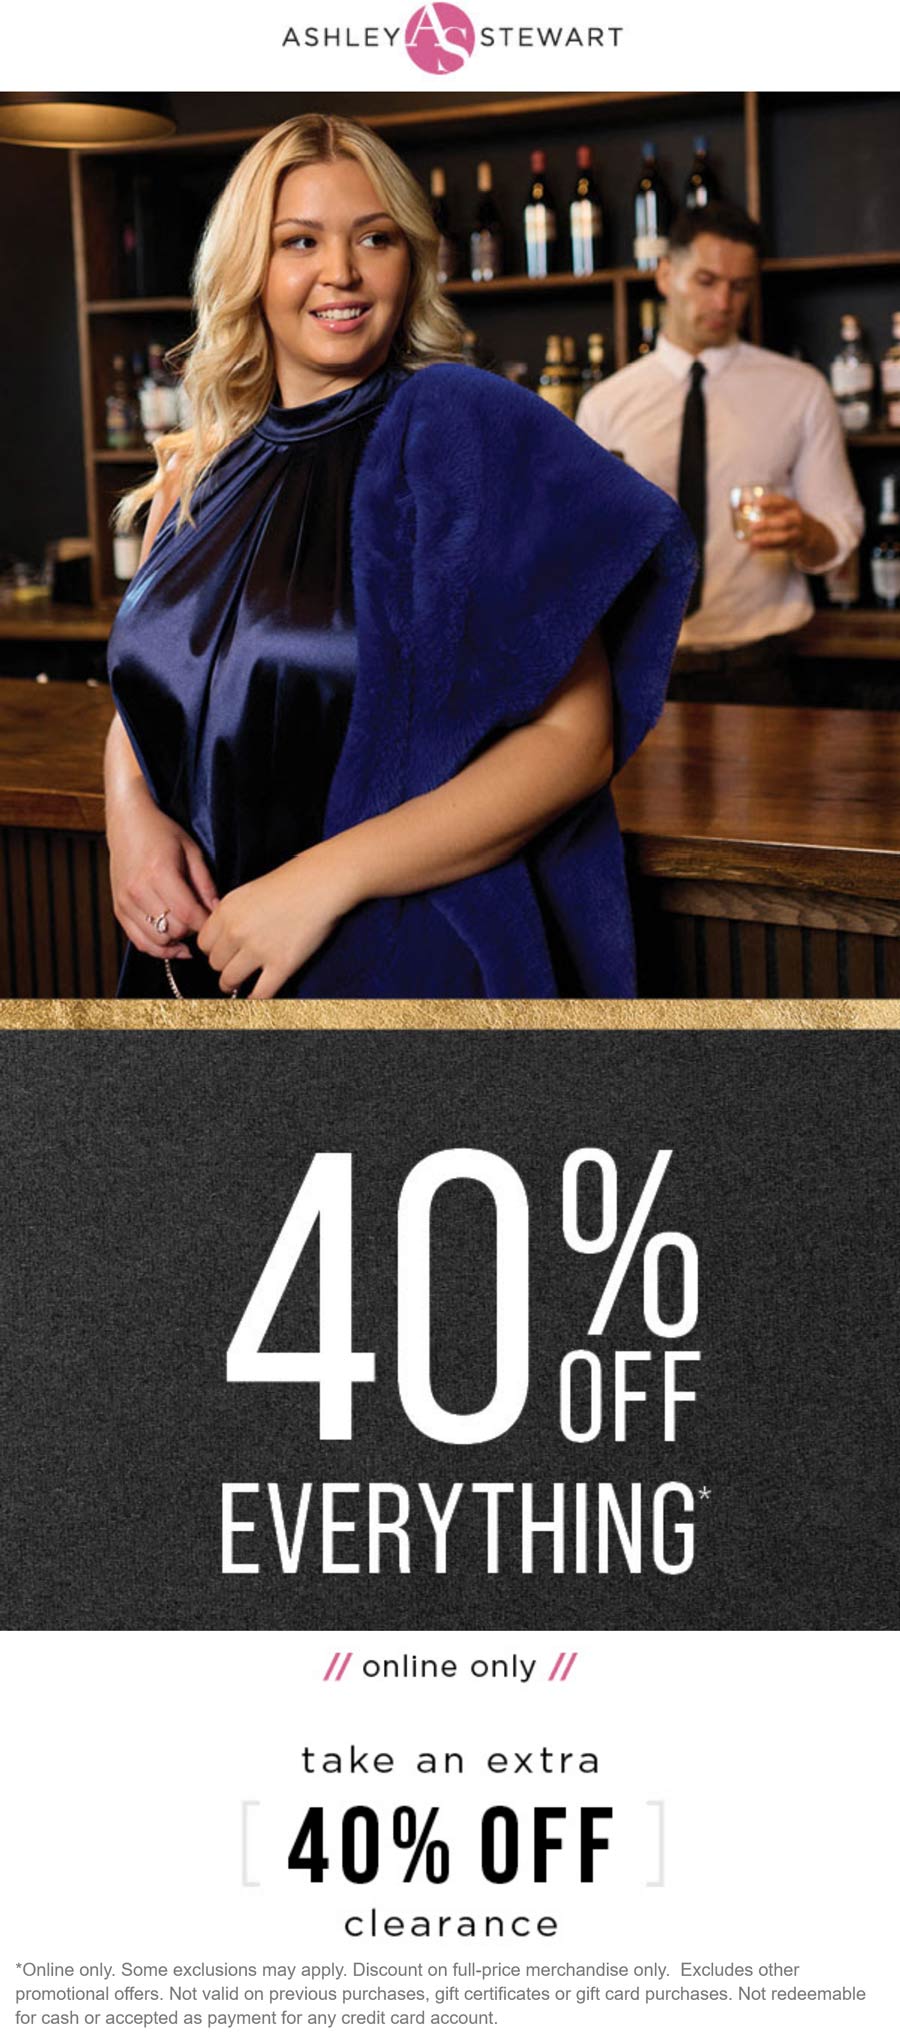 Ashley Stewart stores Coupon  40% off today online at Ashley Stewart #ashleystewart 